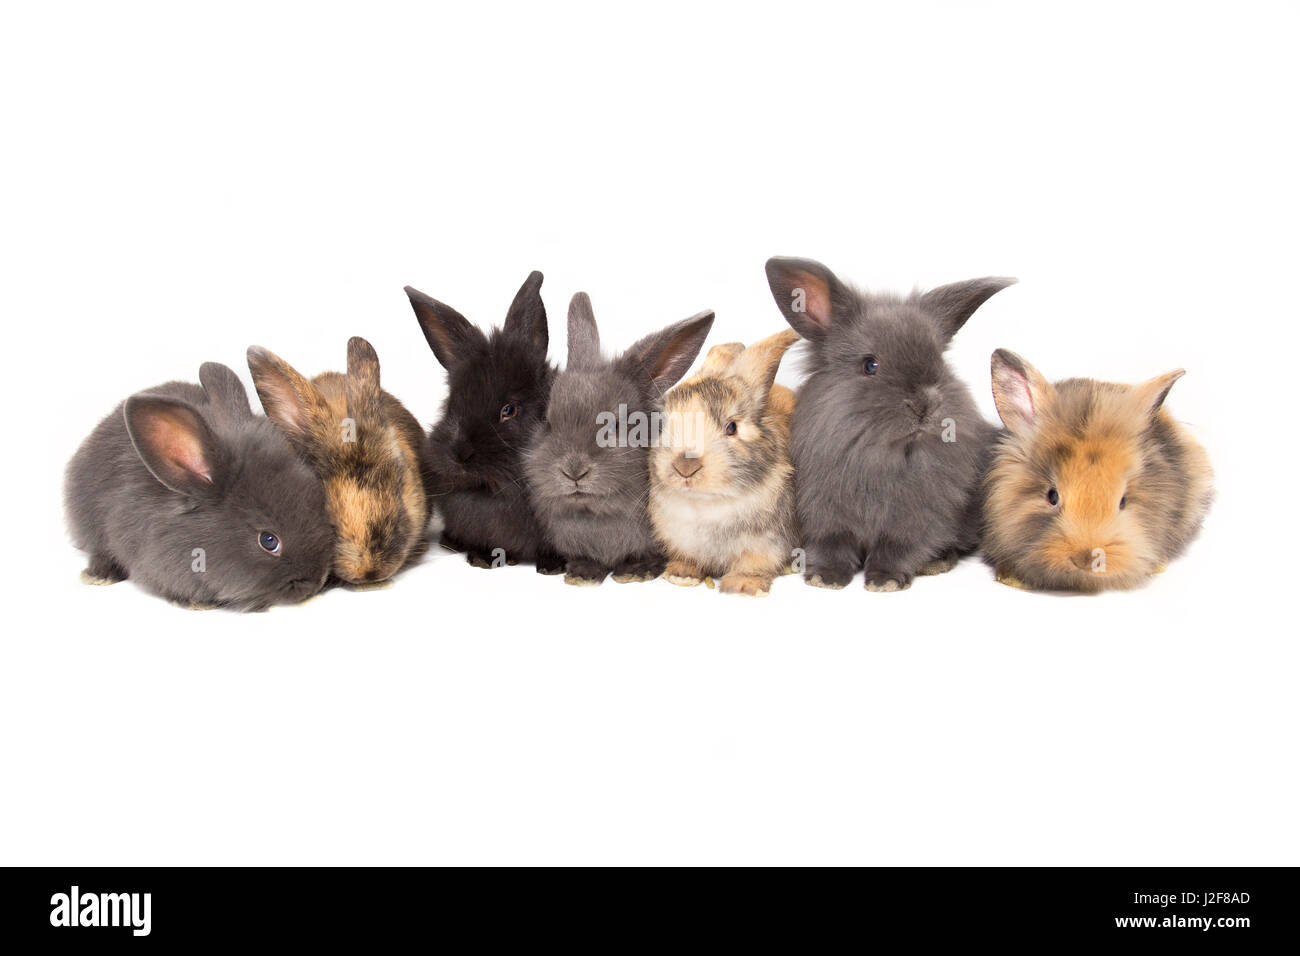 Line-up of baby bunnies Banque D'Images